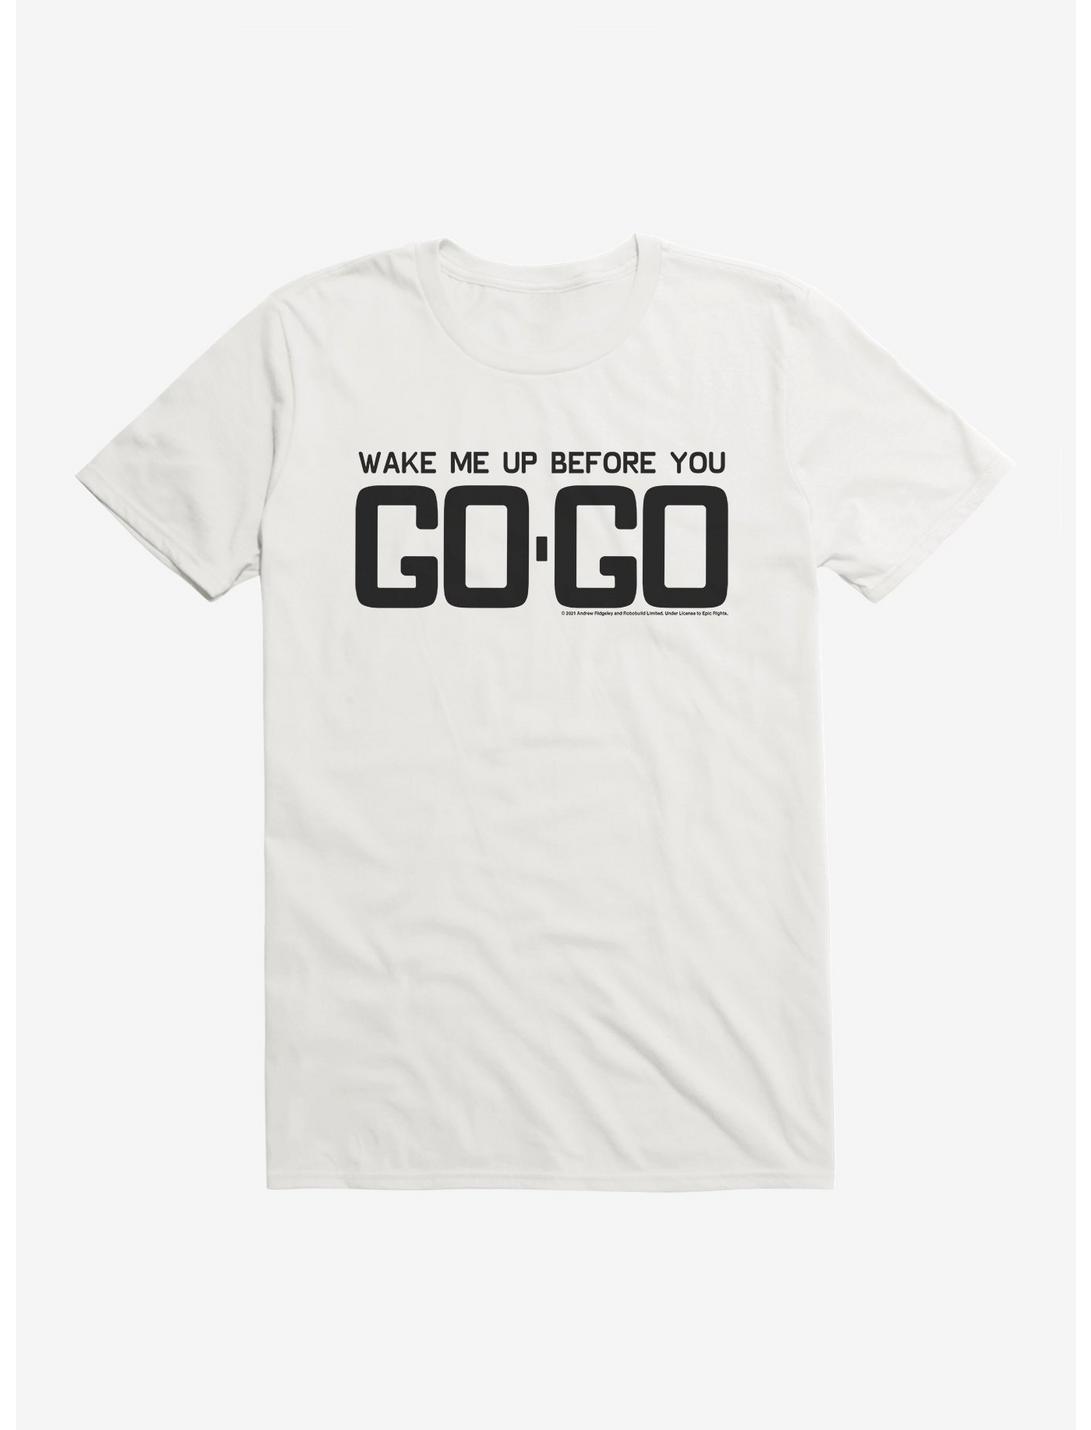 Wham! Me Up Before You Go-Go T-Shirt | BoxLunch